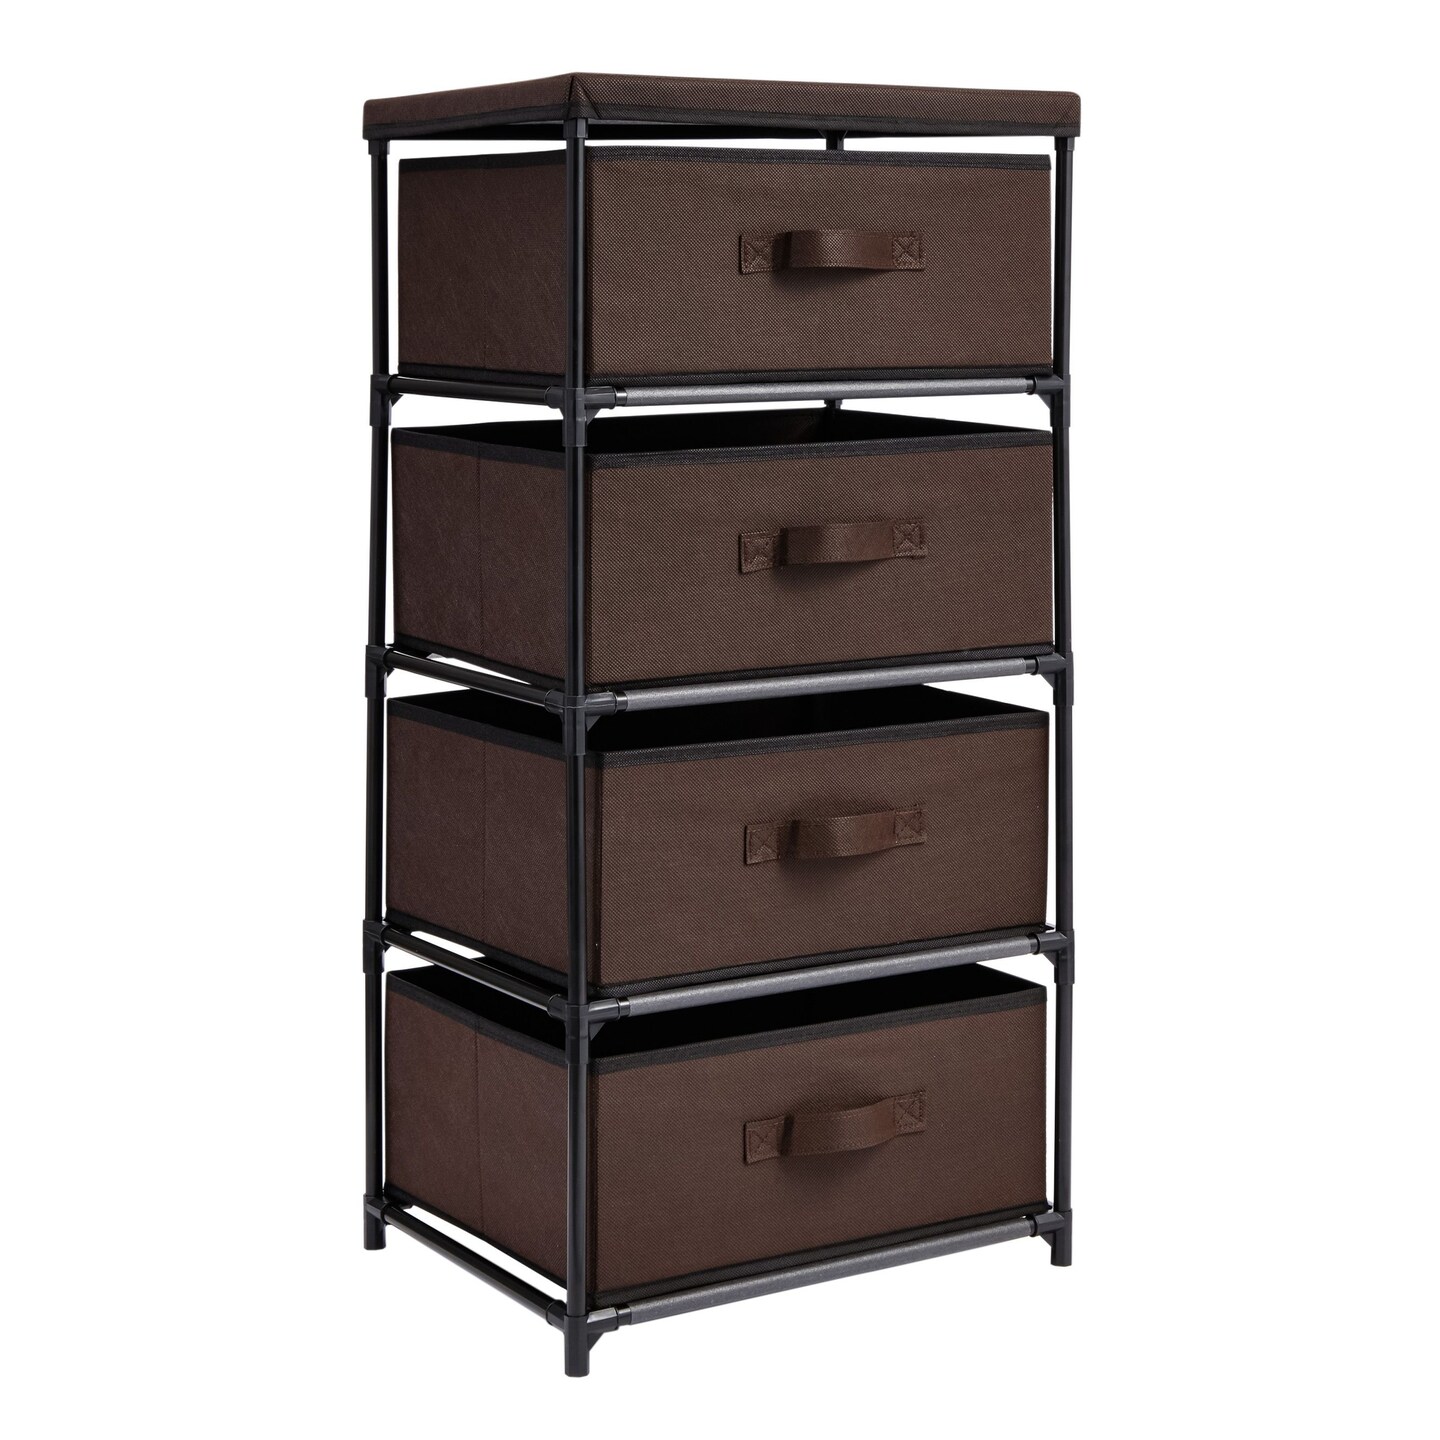 4-Tier Tall Closet Dresser with Drawers - Clothes Organizer and Small Fabric Storage for Bedroom (Dark Brown)